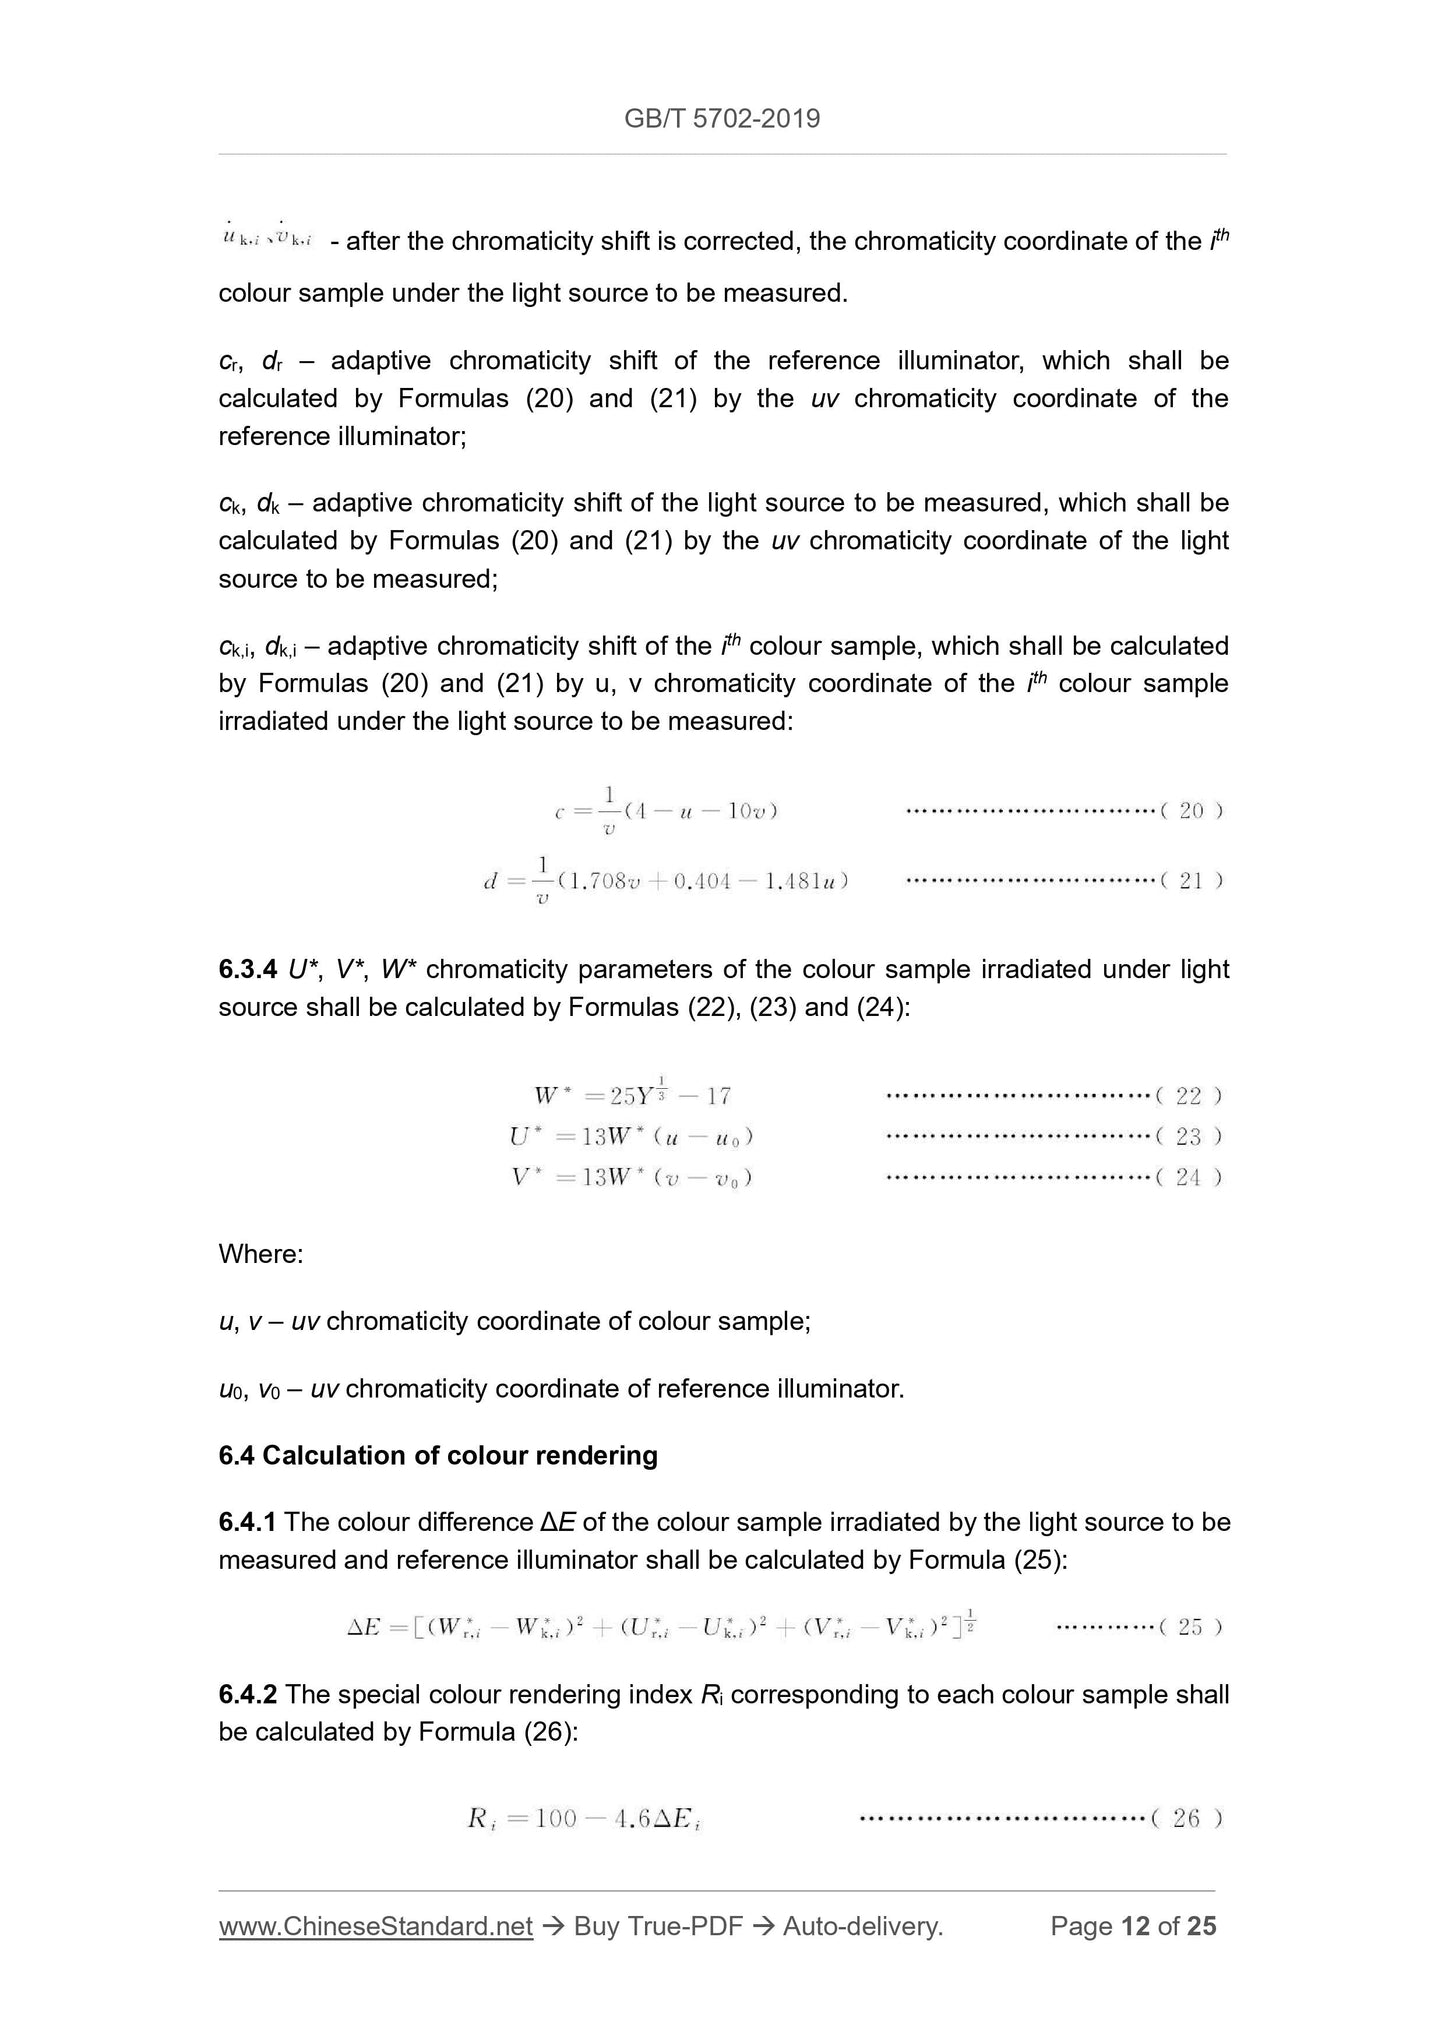 GB/T 5702-2019 Page 5